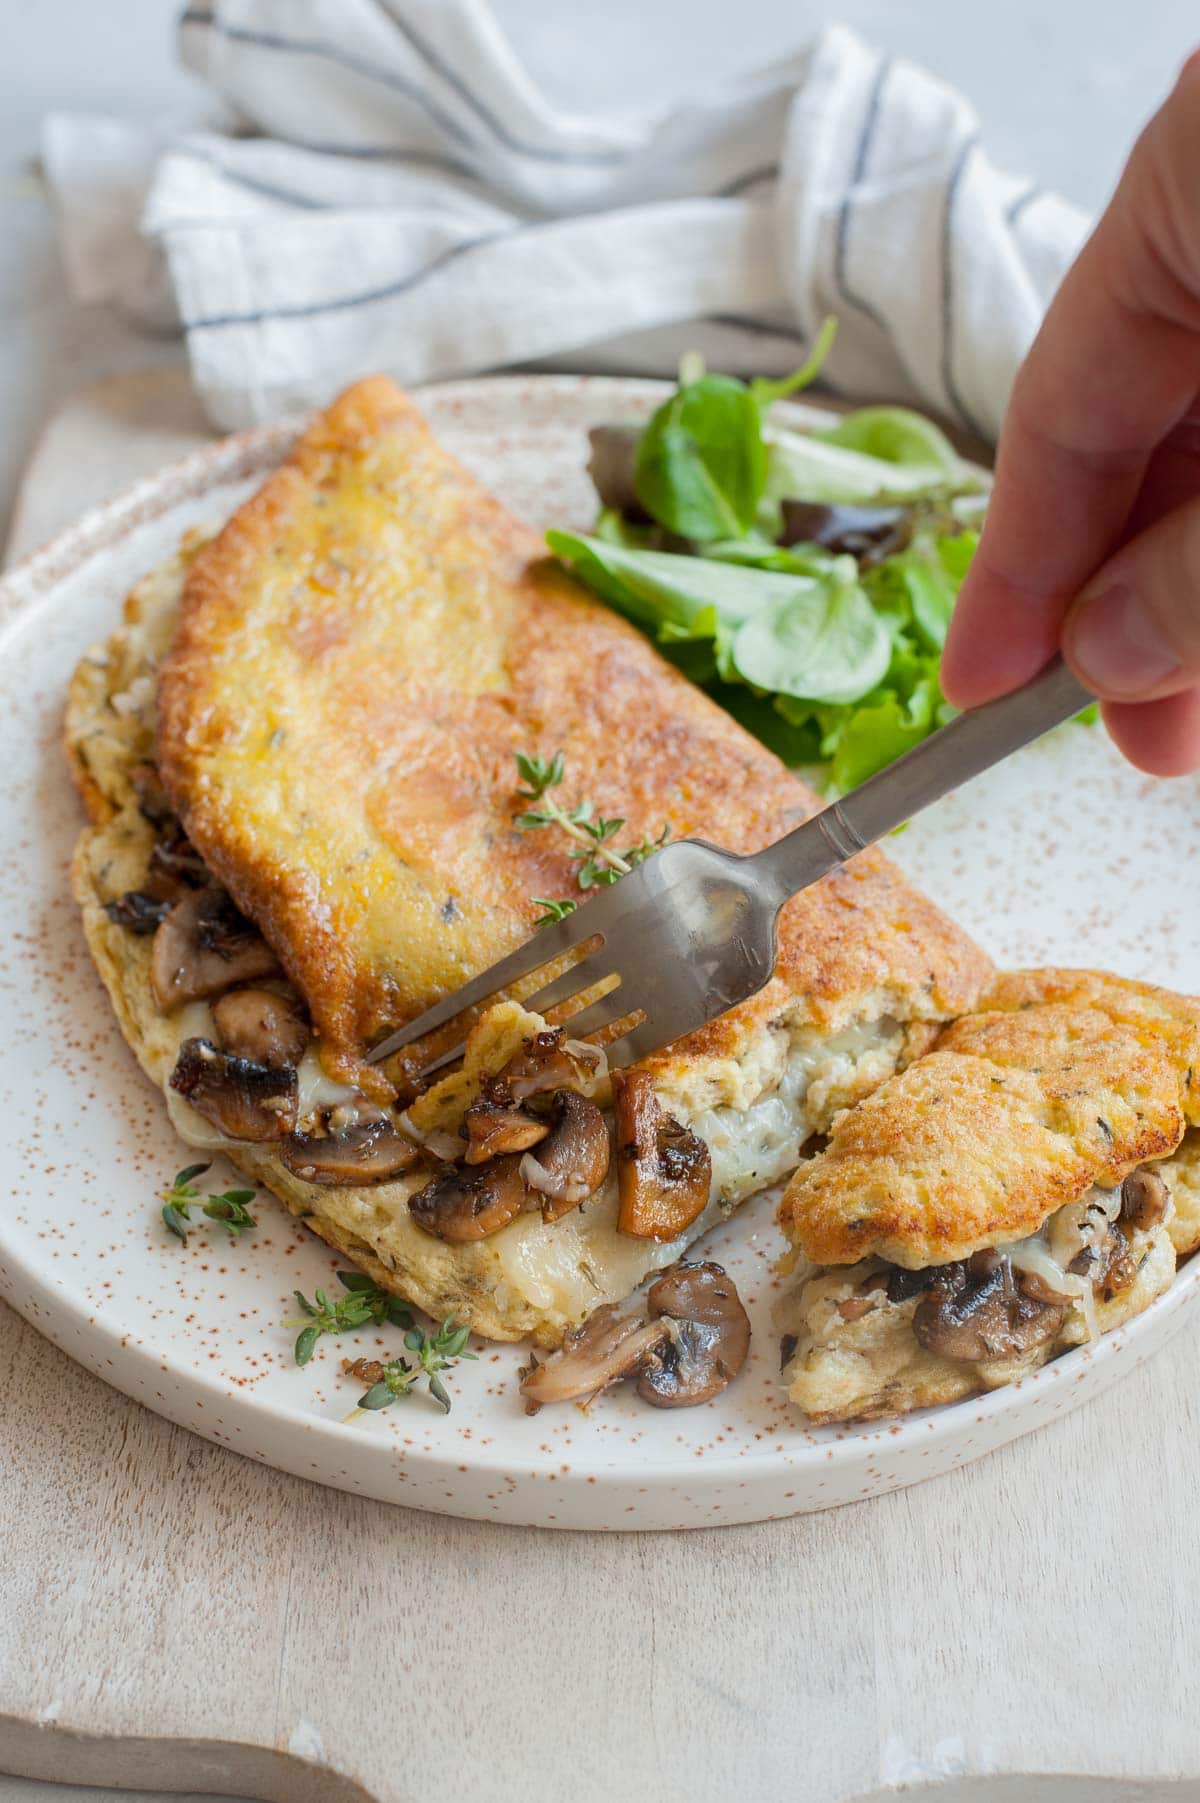 Mushroom omelet on a white plate is being cut with a fork.